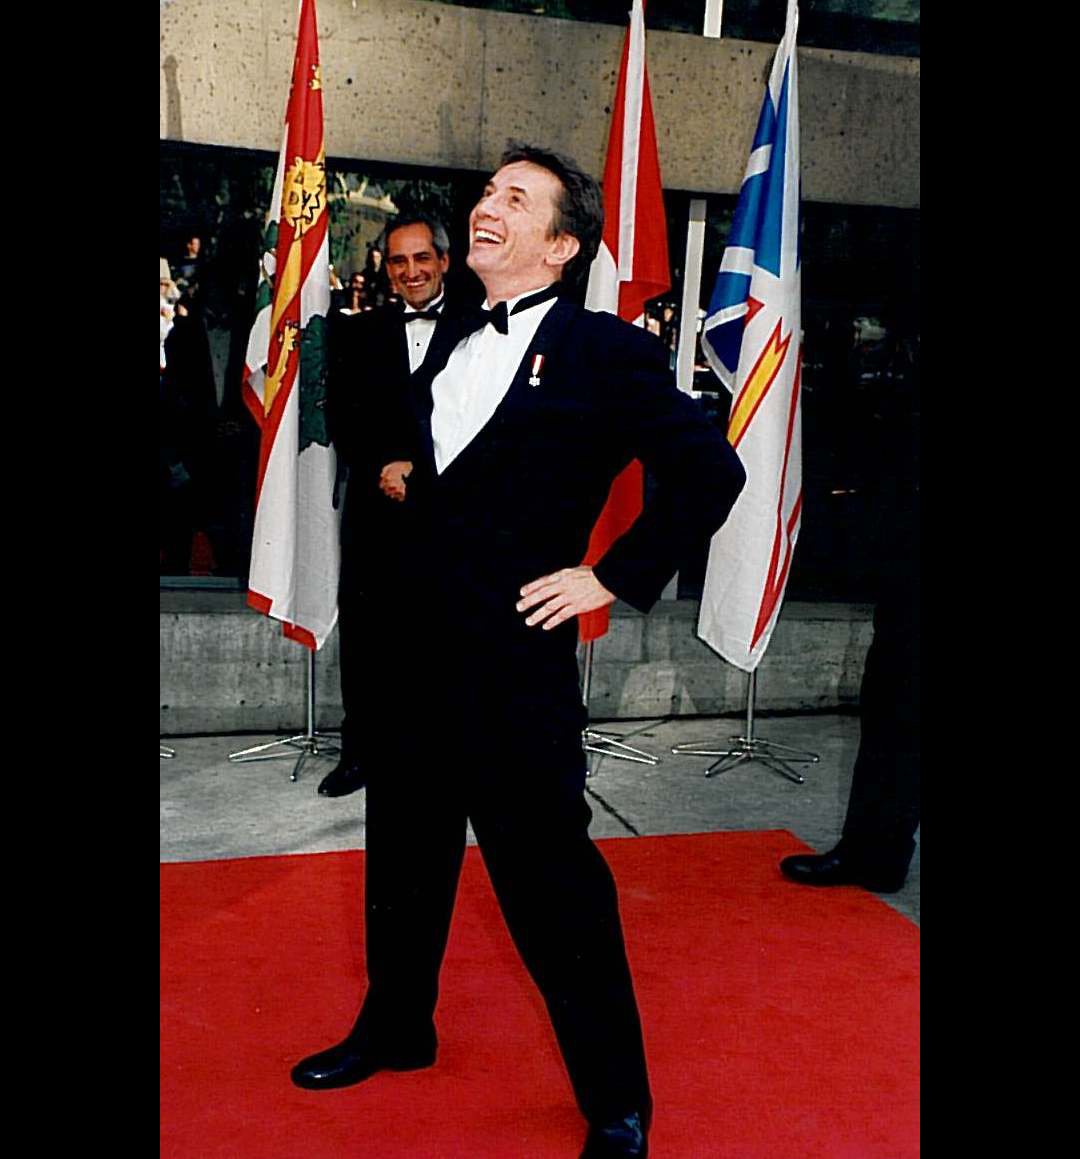 A very happy birthday to 2000 Canada\s Walk of Fame Inductee Martin Short! 